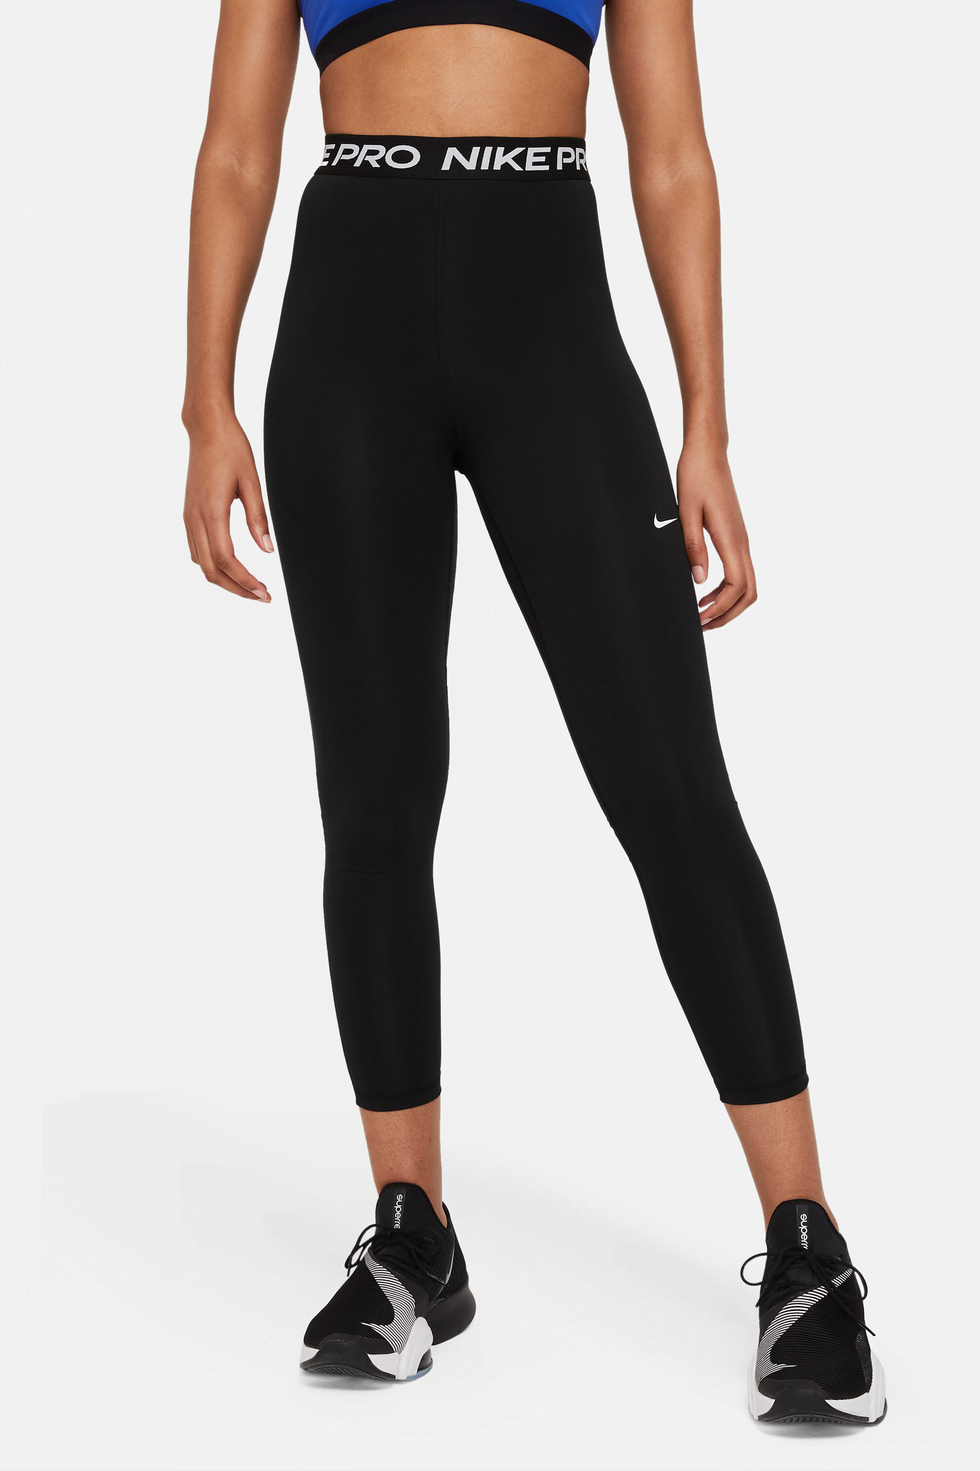 11 best Nike leggings for every type of workout